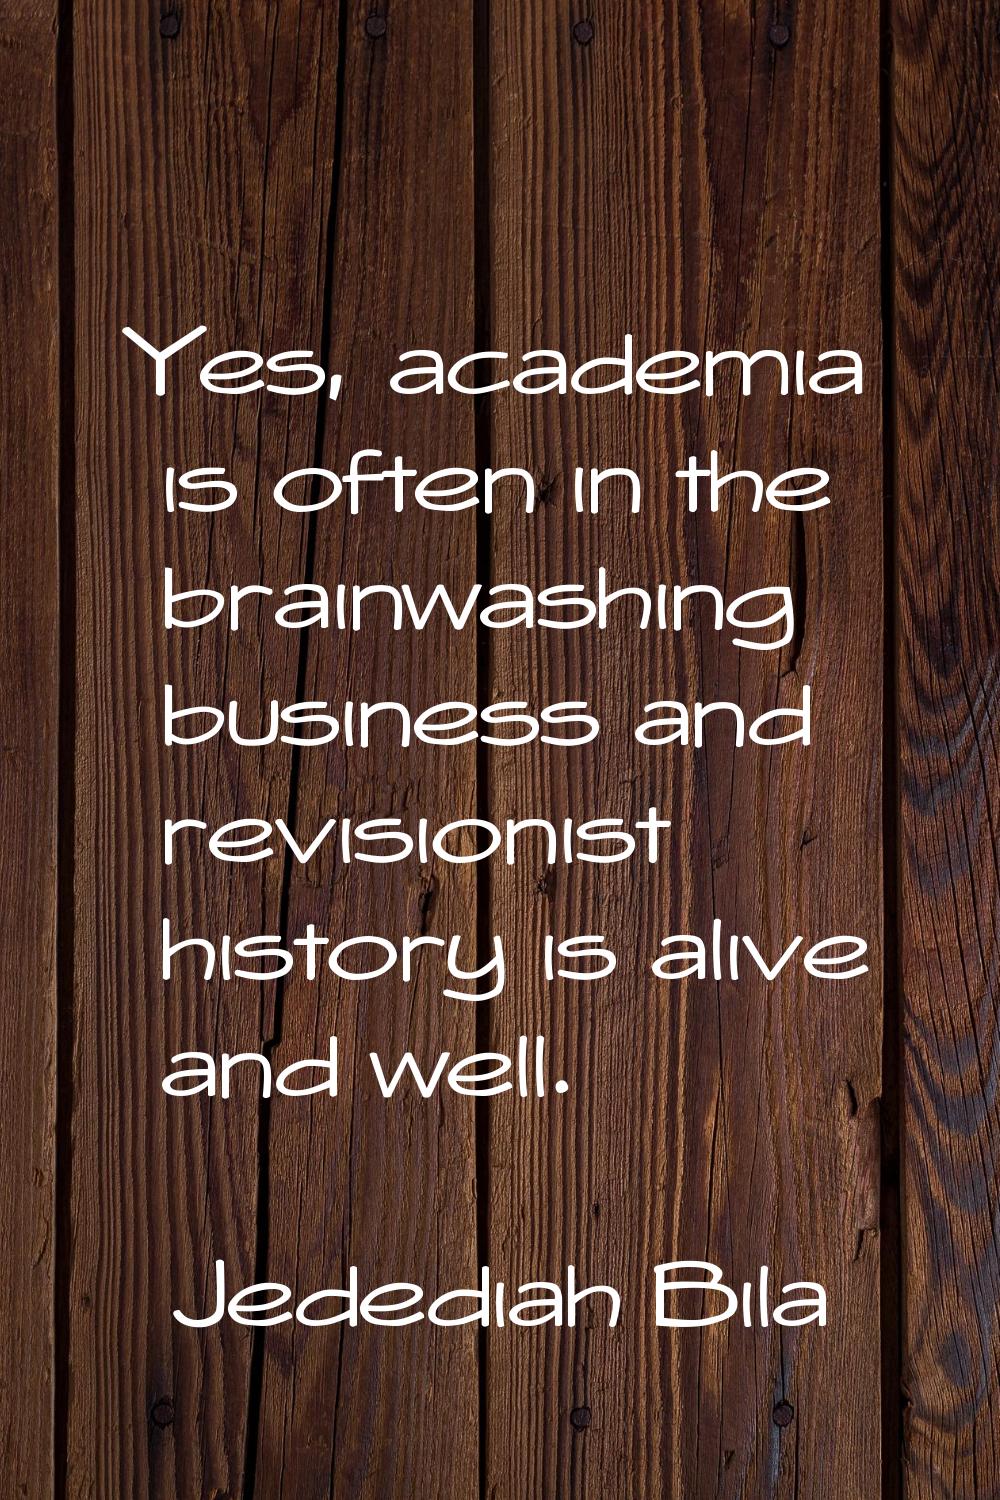 Yes, academia is often in the brainwashing business and revisionist history is alive and well.